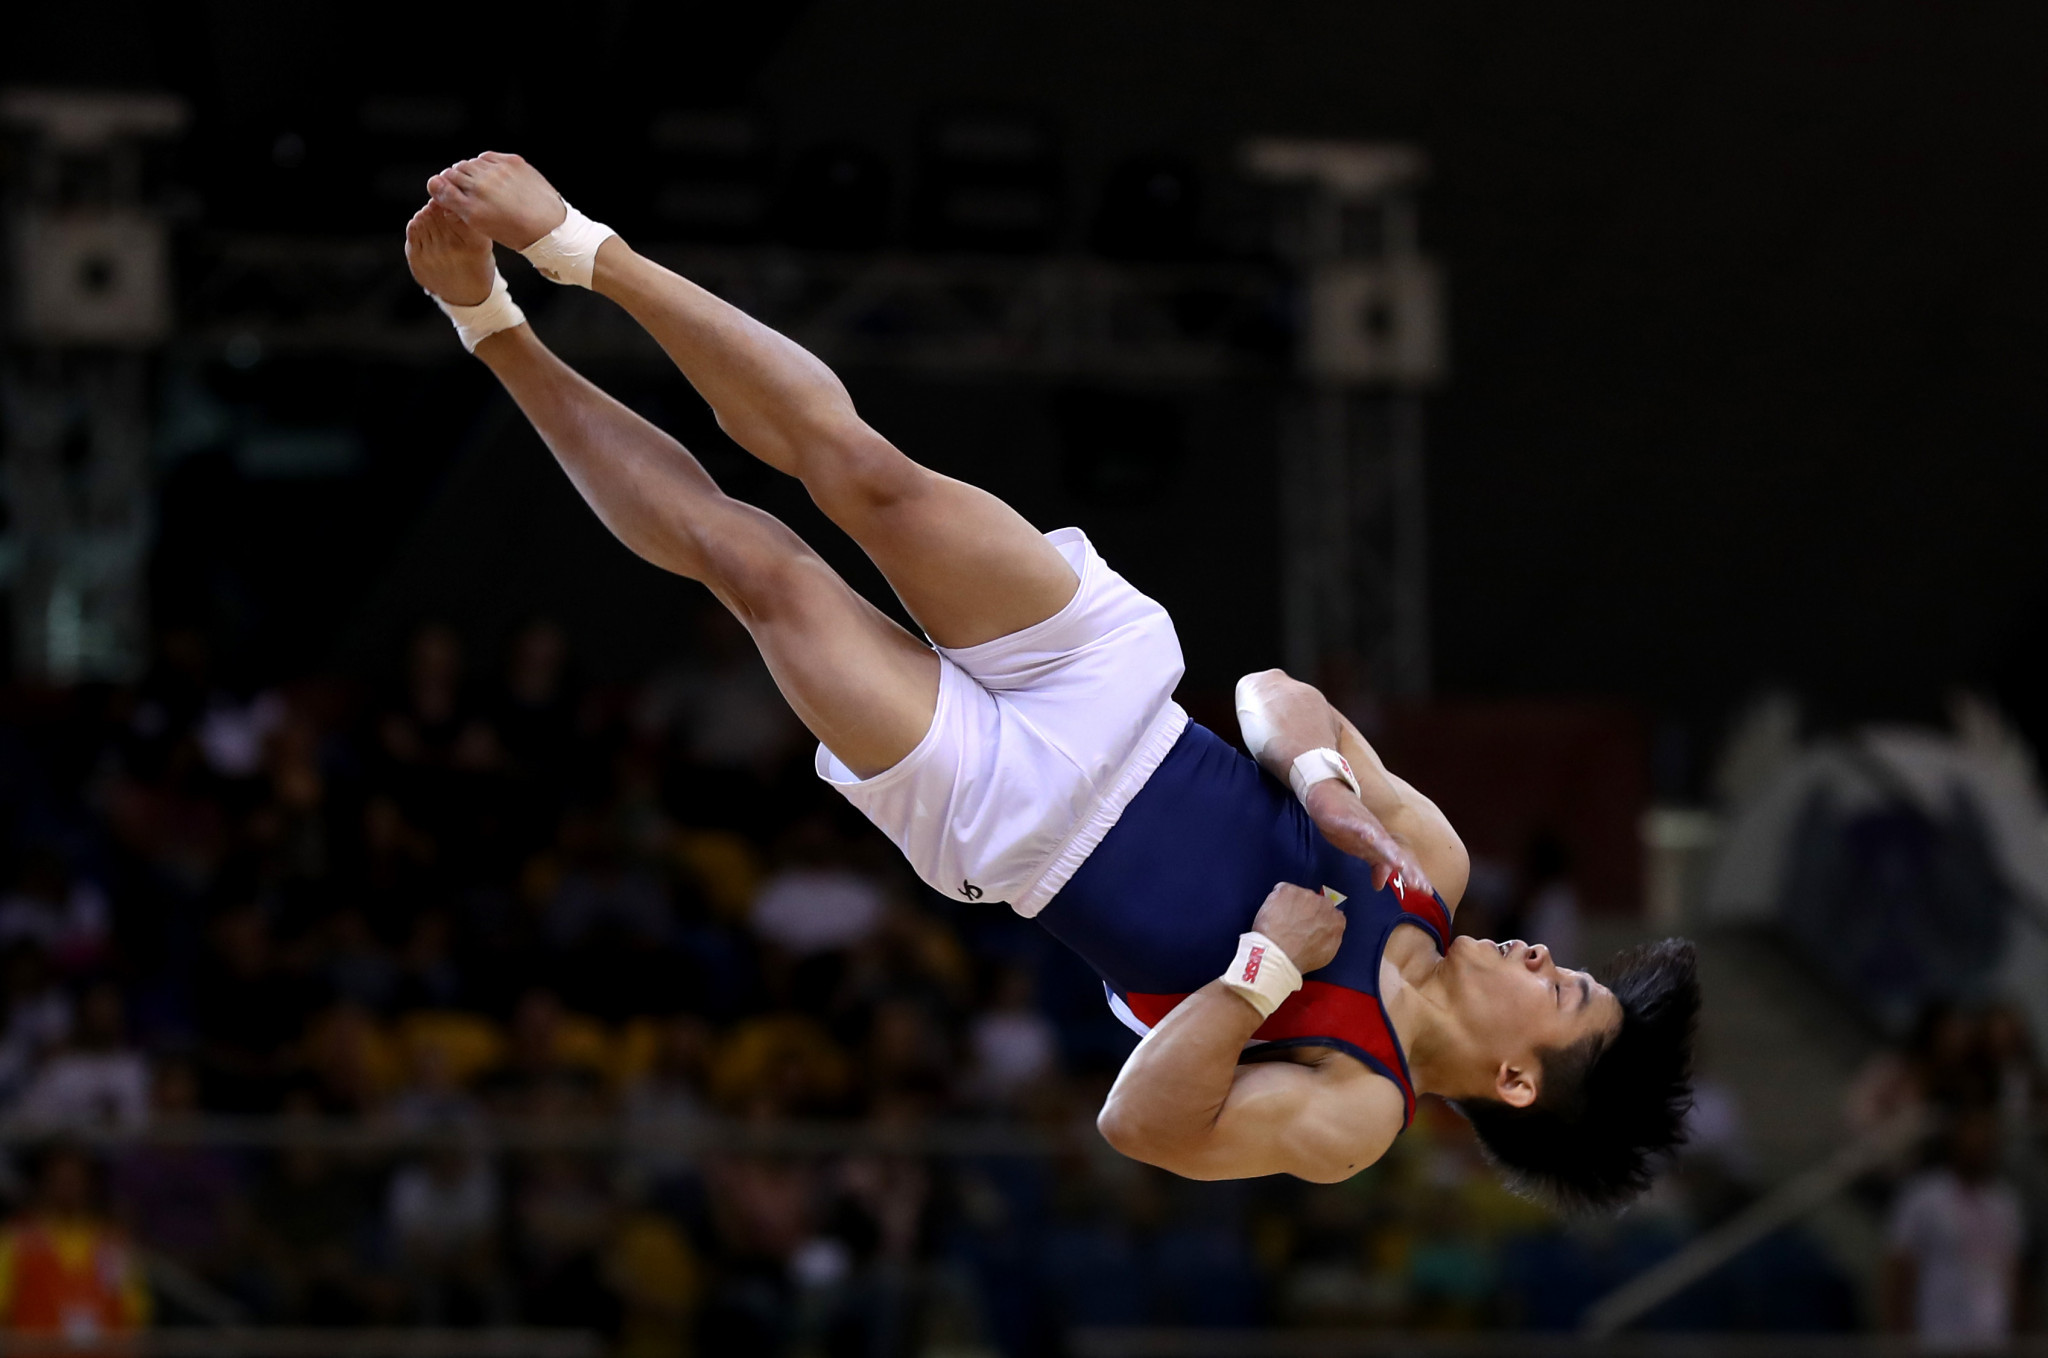 Carlos Edriel Yulo of The Philippines claimed victory in the men's floor event ©Getty Images